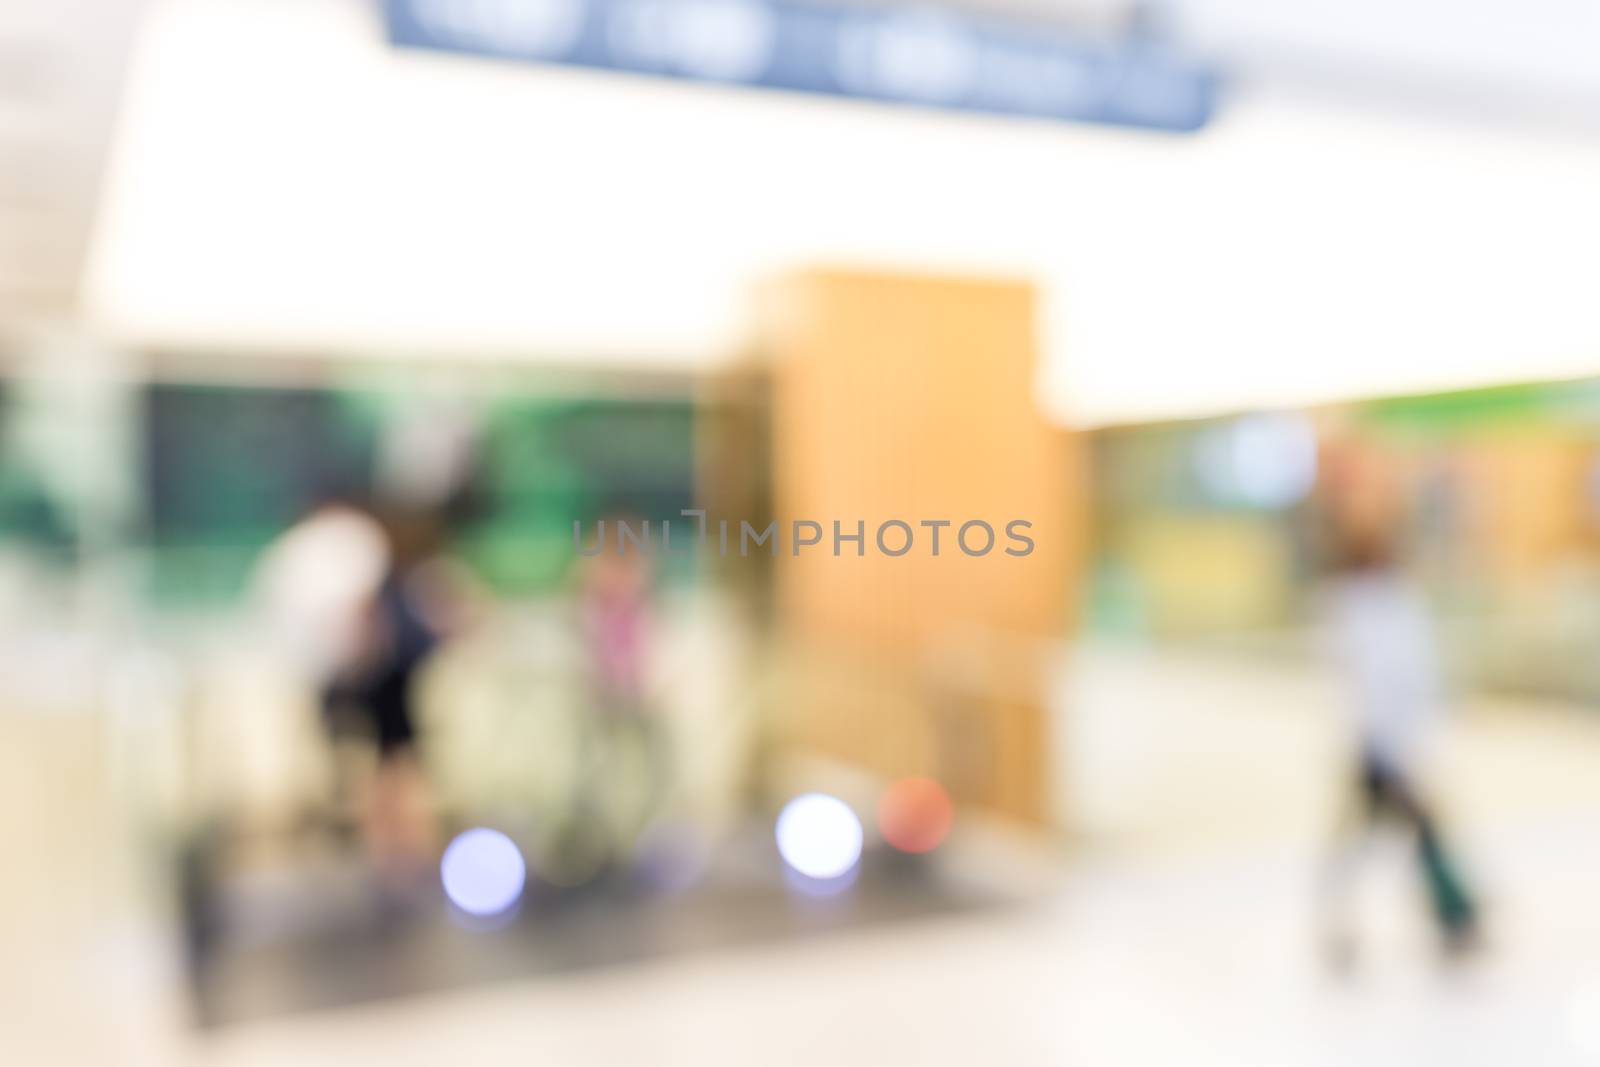 Shopping mall blurred background